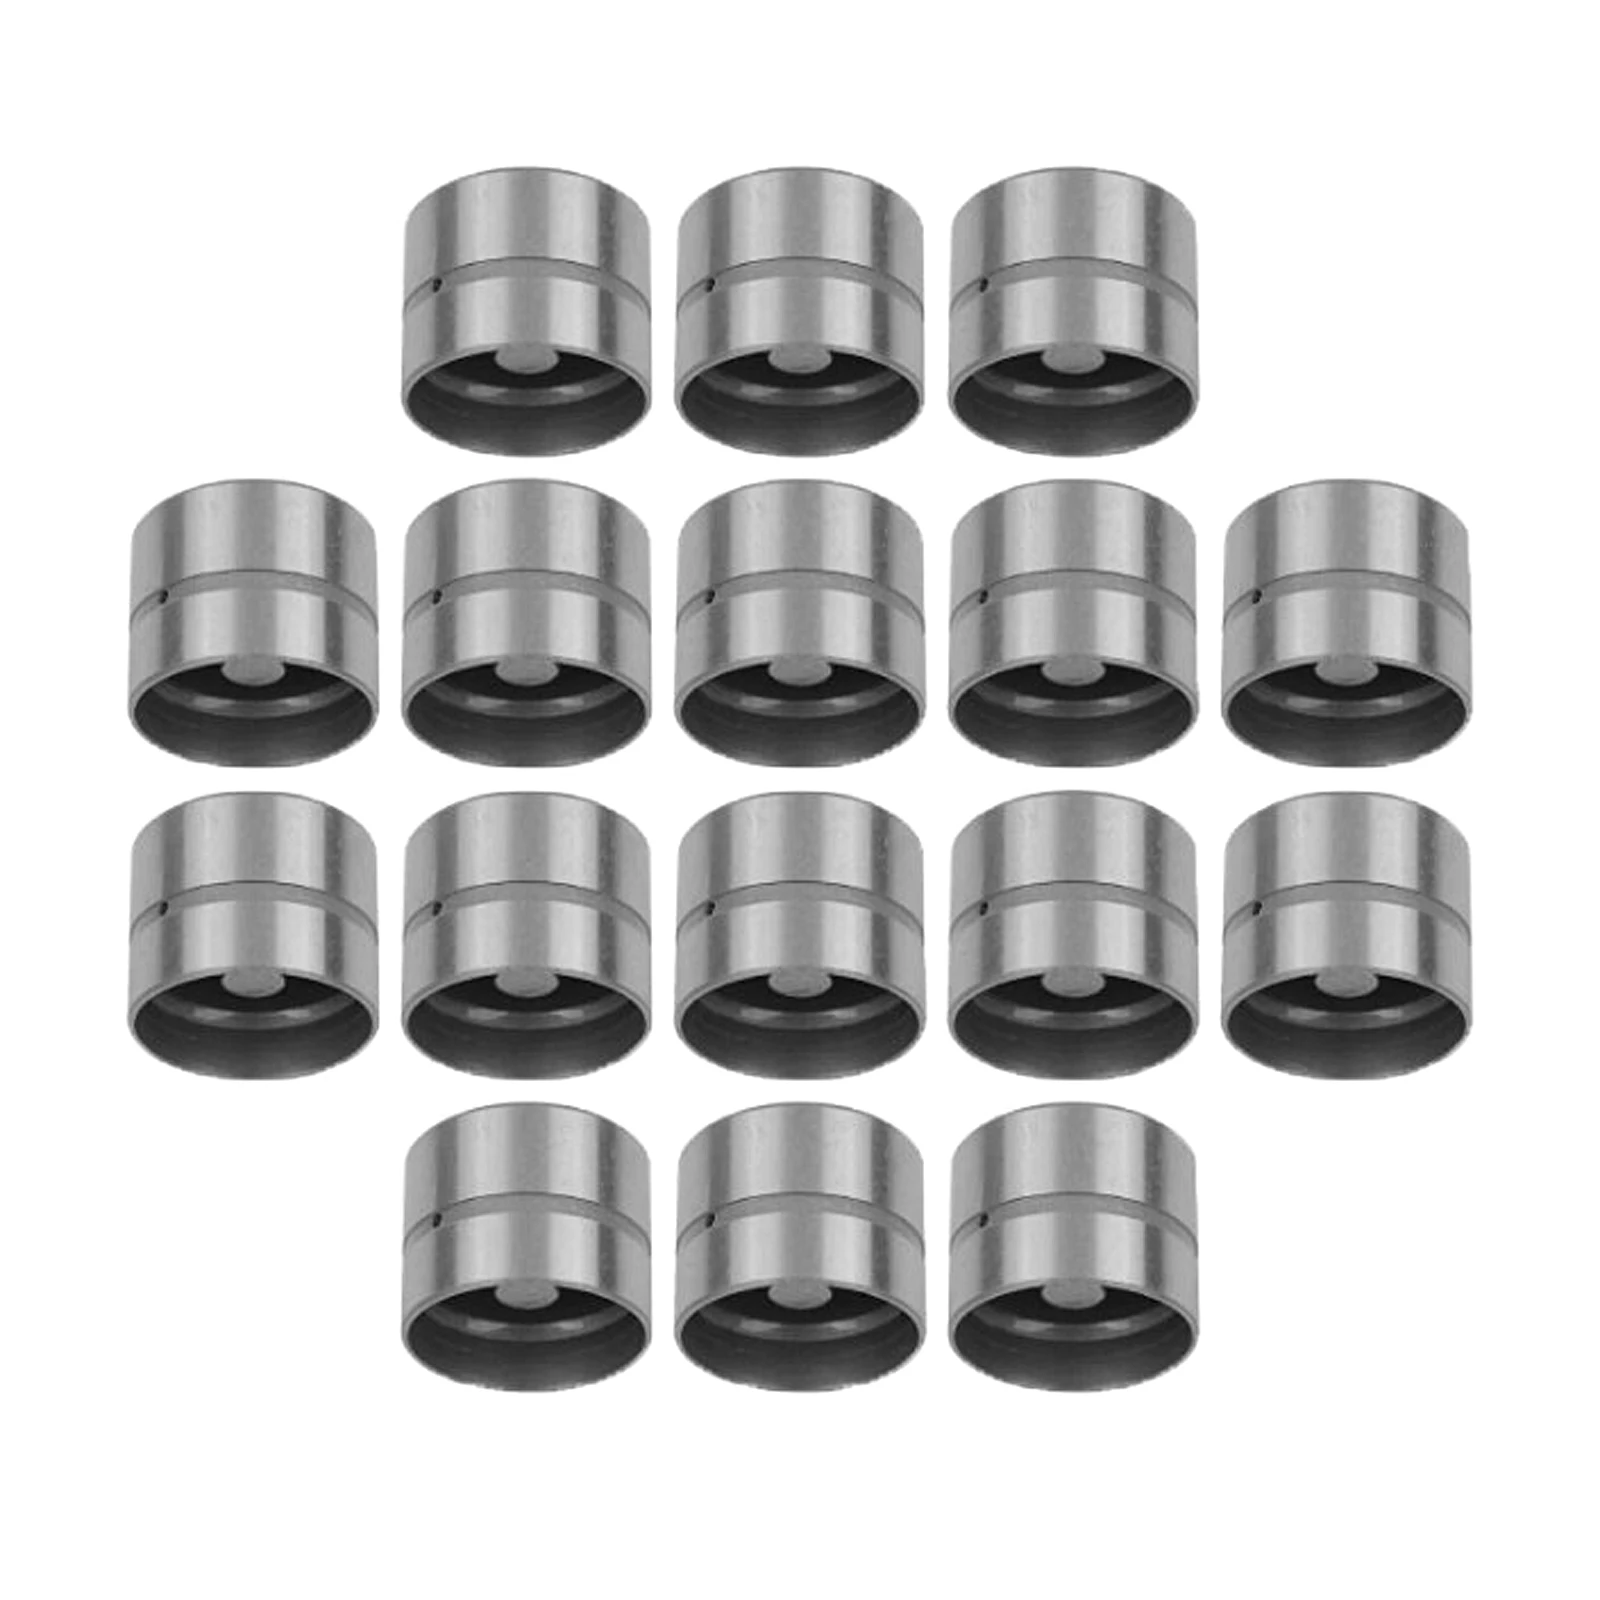 

Set of 16 Hydraulic Tappets Replaces 420011810 for C16XE Z14XE Z16XE Z18XE X30XE Professional High Performance